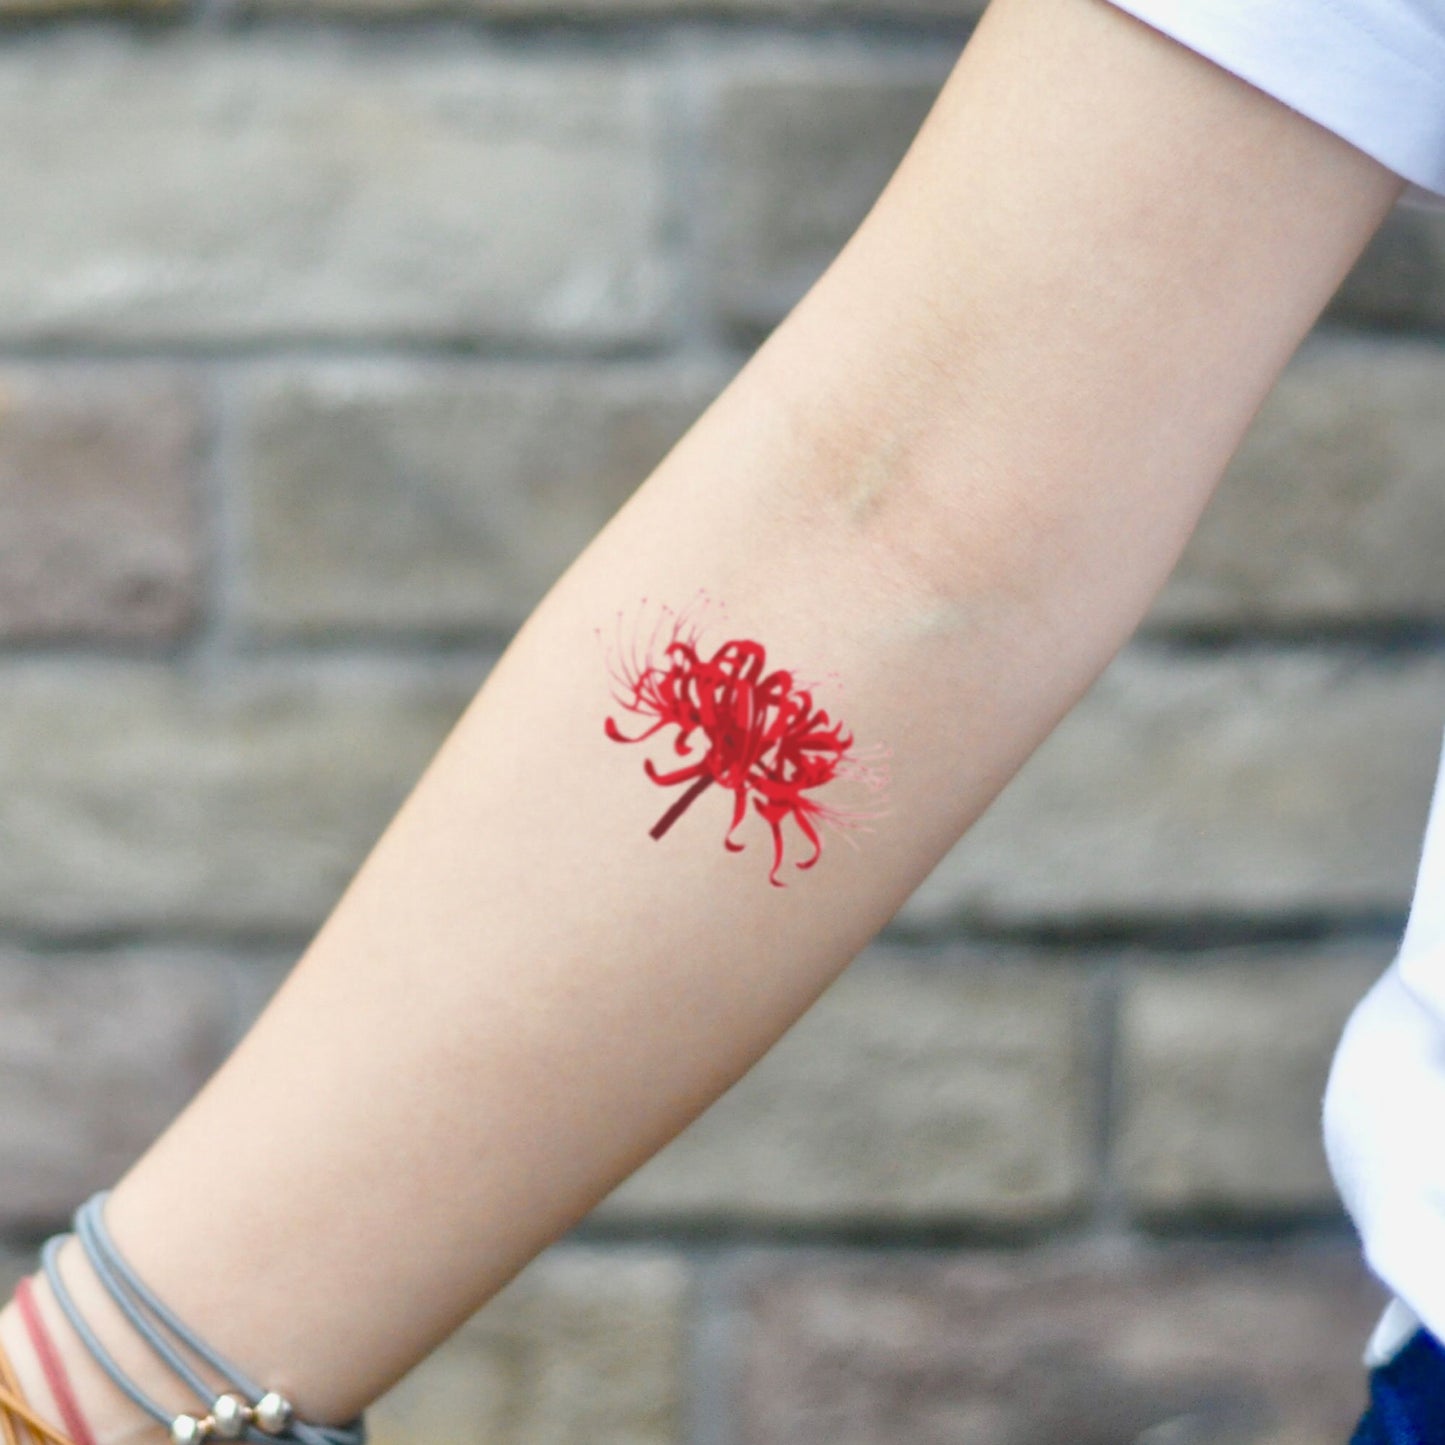 fake small red spider lily flower temporary tattoo sticker design idea on inner arm